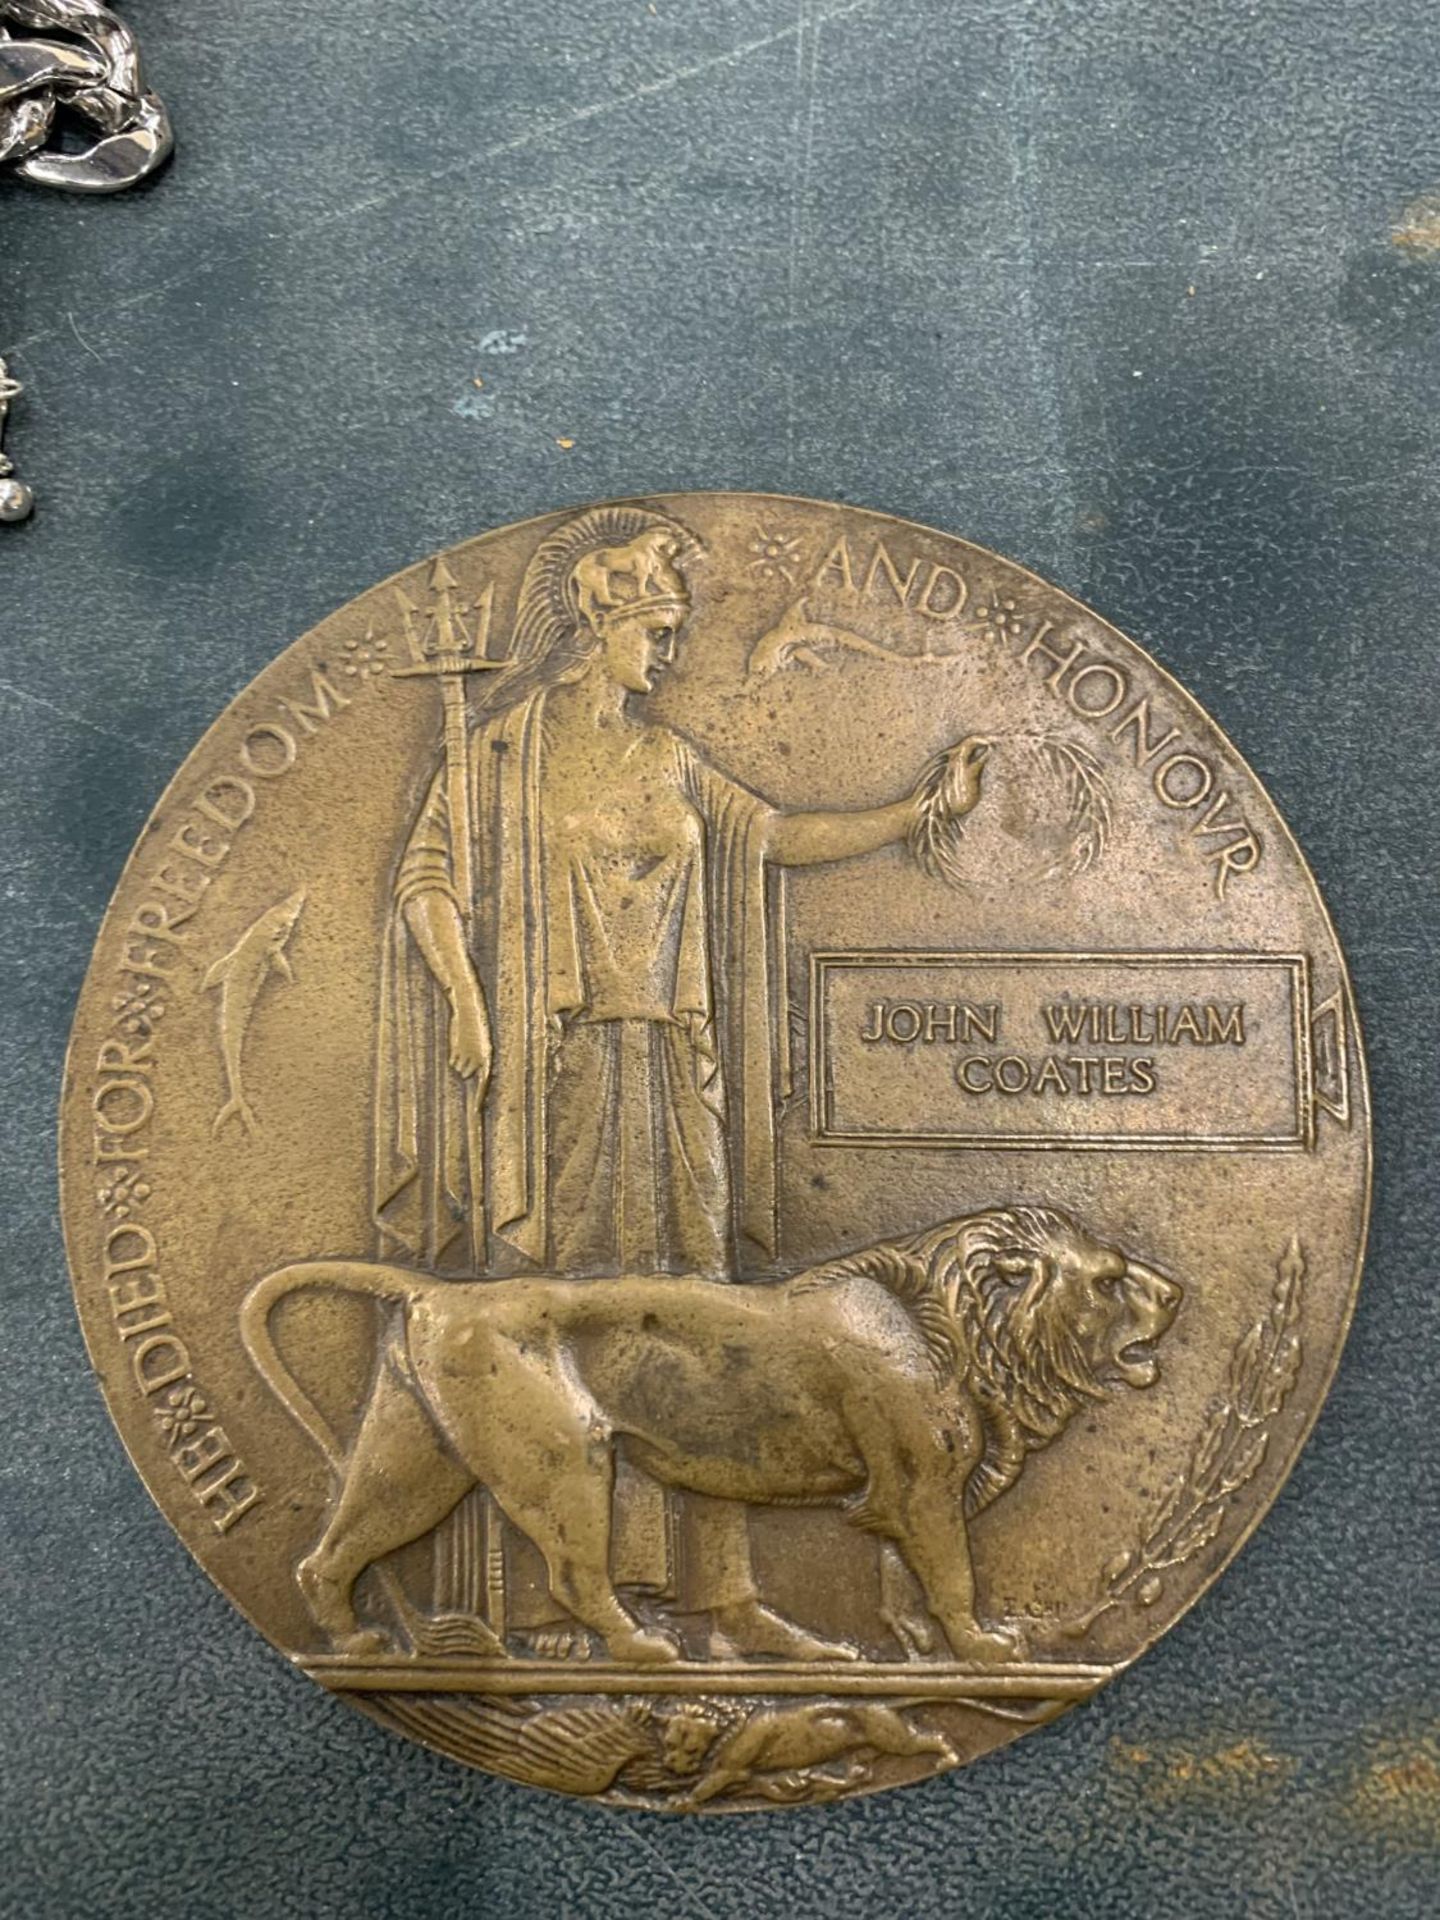 A WWI MILITARY DEATH PLAQUE FOR JOHN WILLIAM COATES